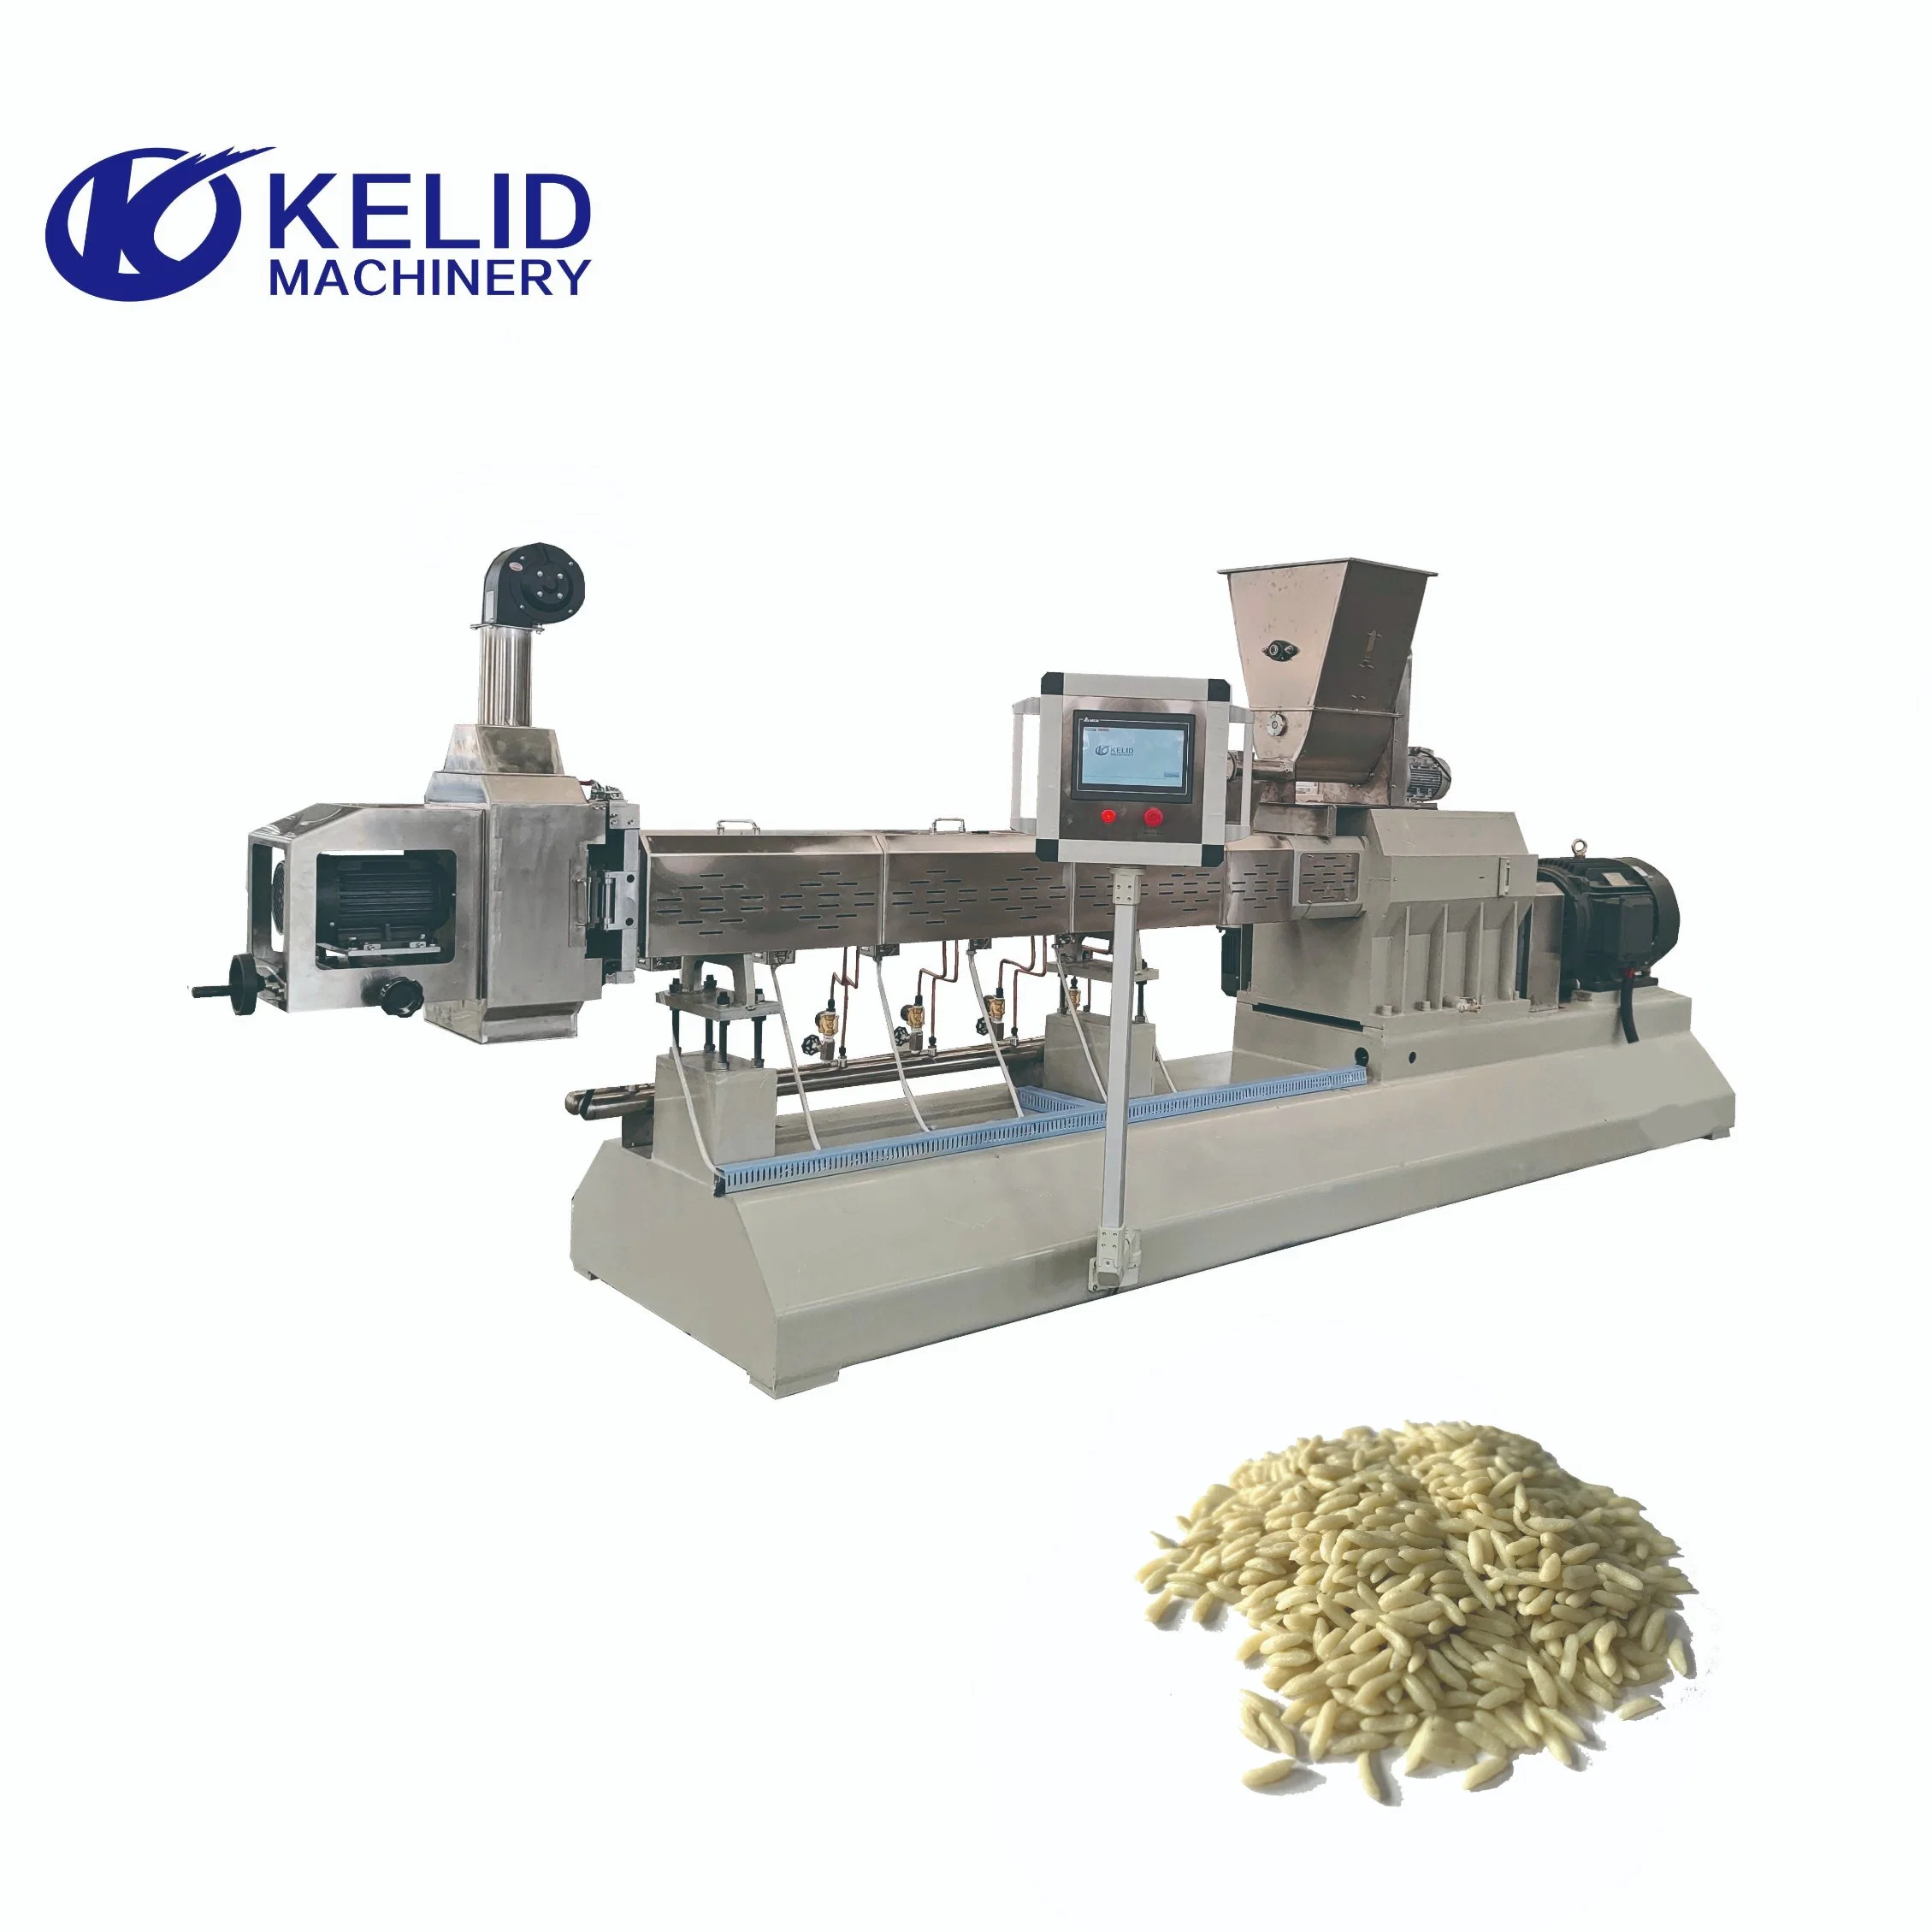 Fully Automatic Industrial Reconstituted Rice Process Equipment